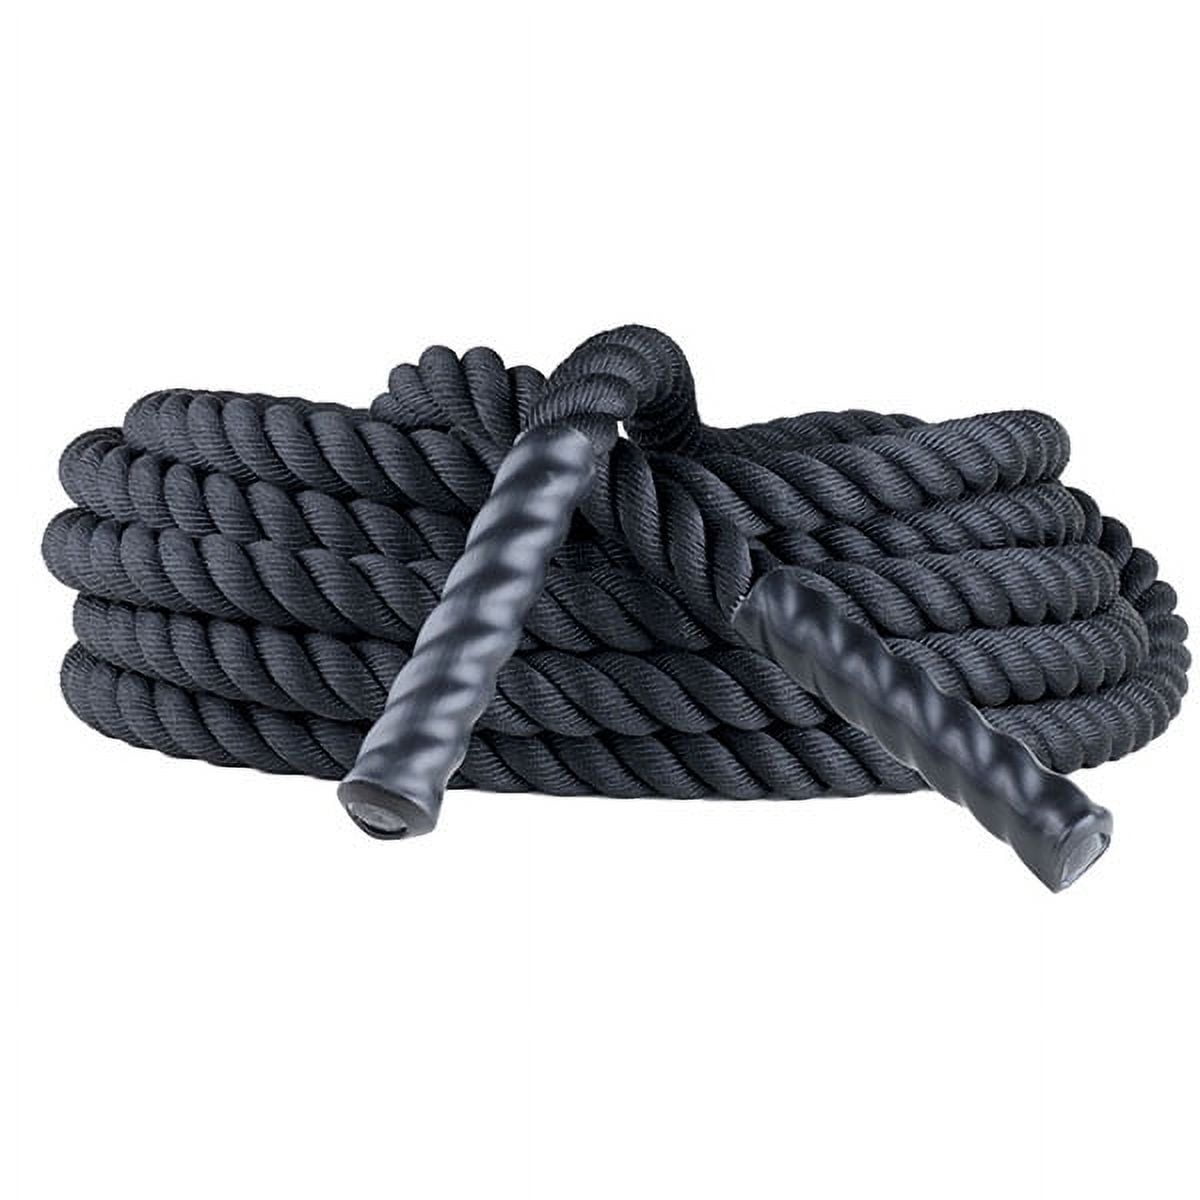 Picture of Champion Sports RPT1550 1.5 in. x 50 ft. Rhino Poly Training Rope, Black